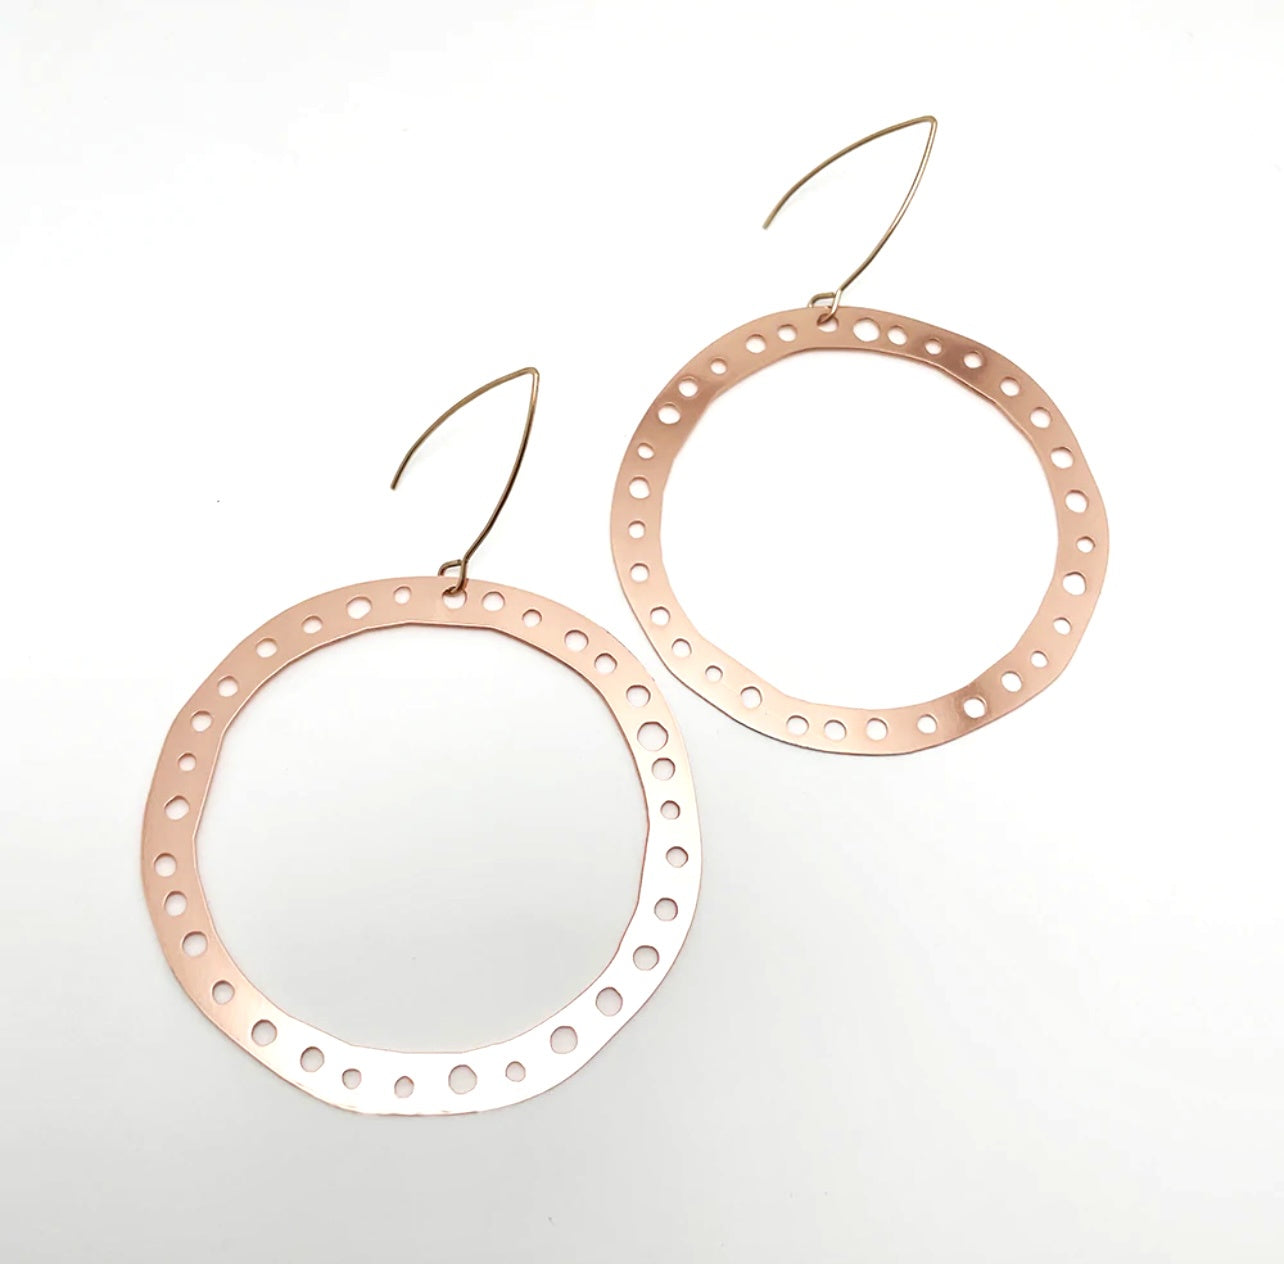 Giant Dotty hoops in rose gold